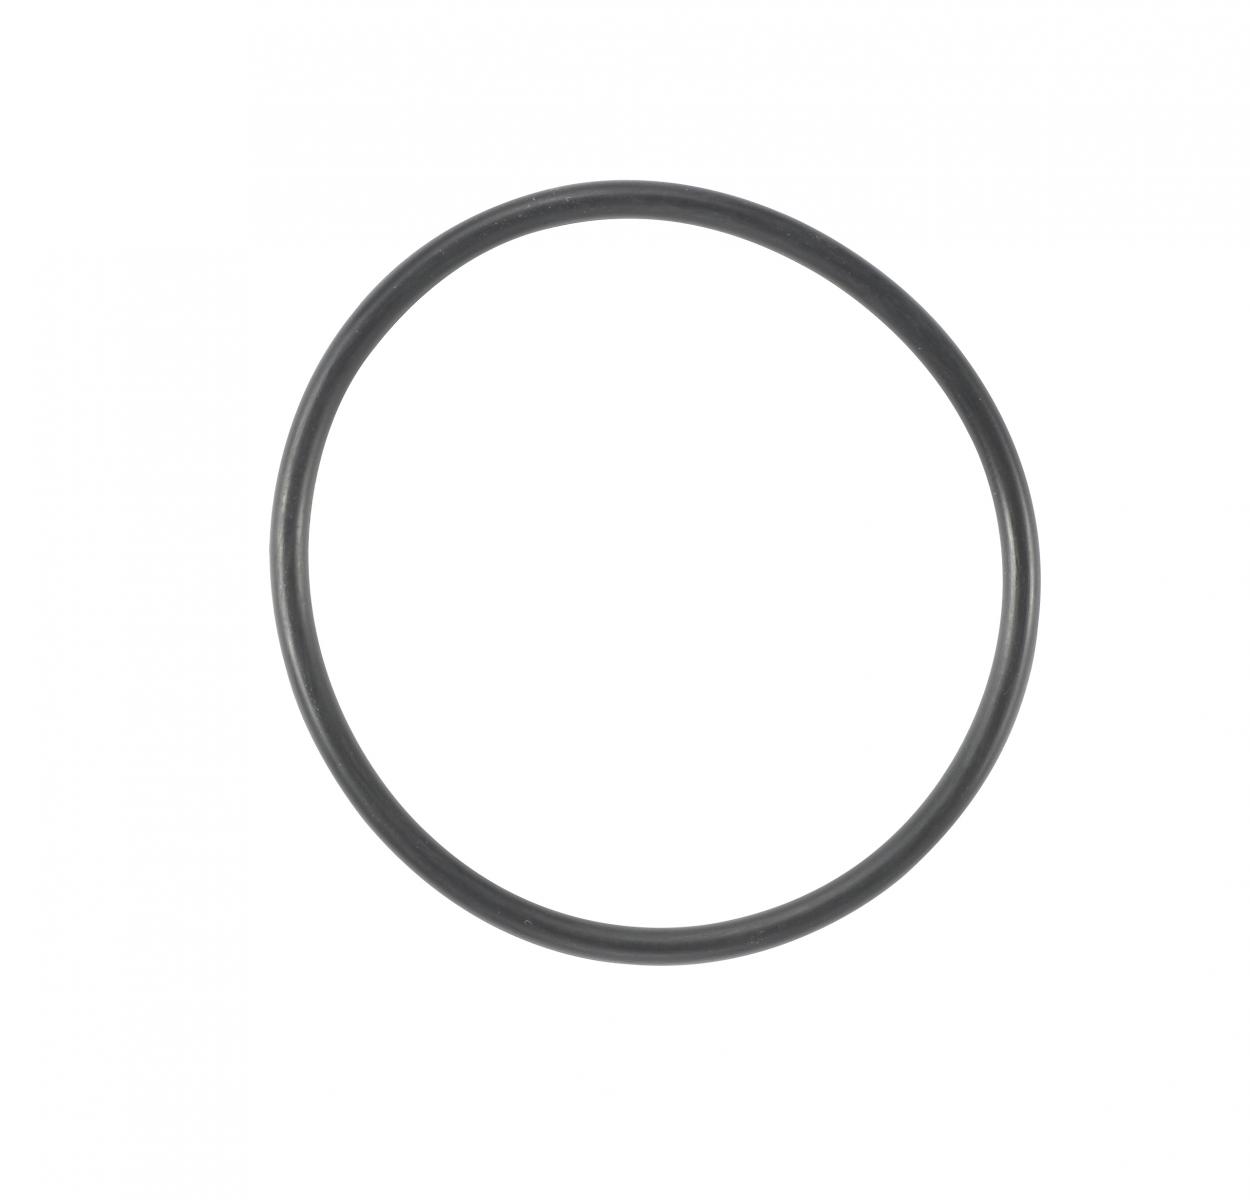 TapeTech® O-Ring. Part number 149032